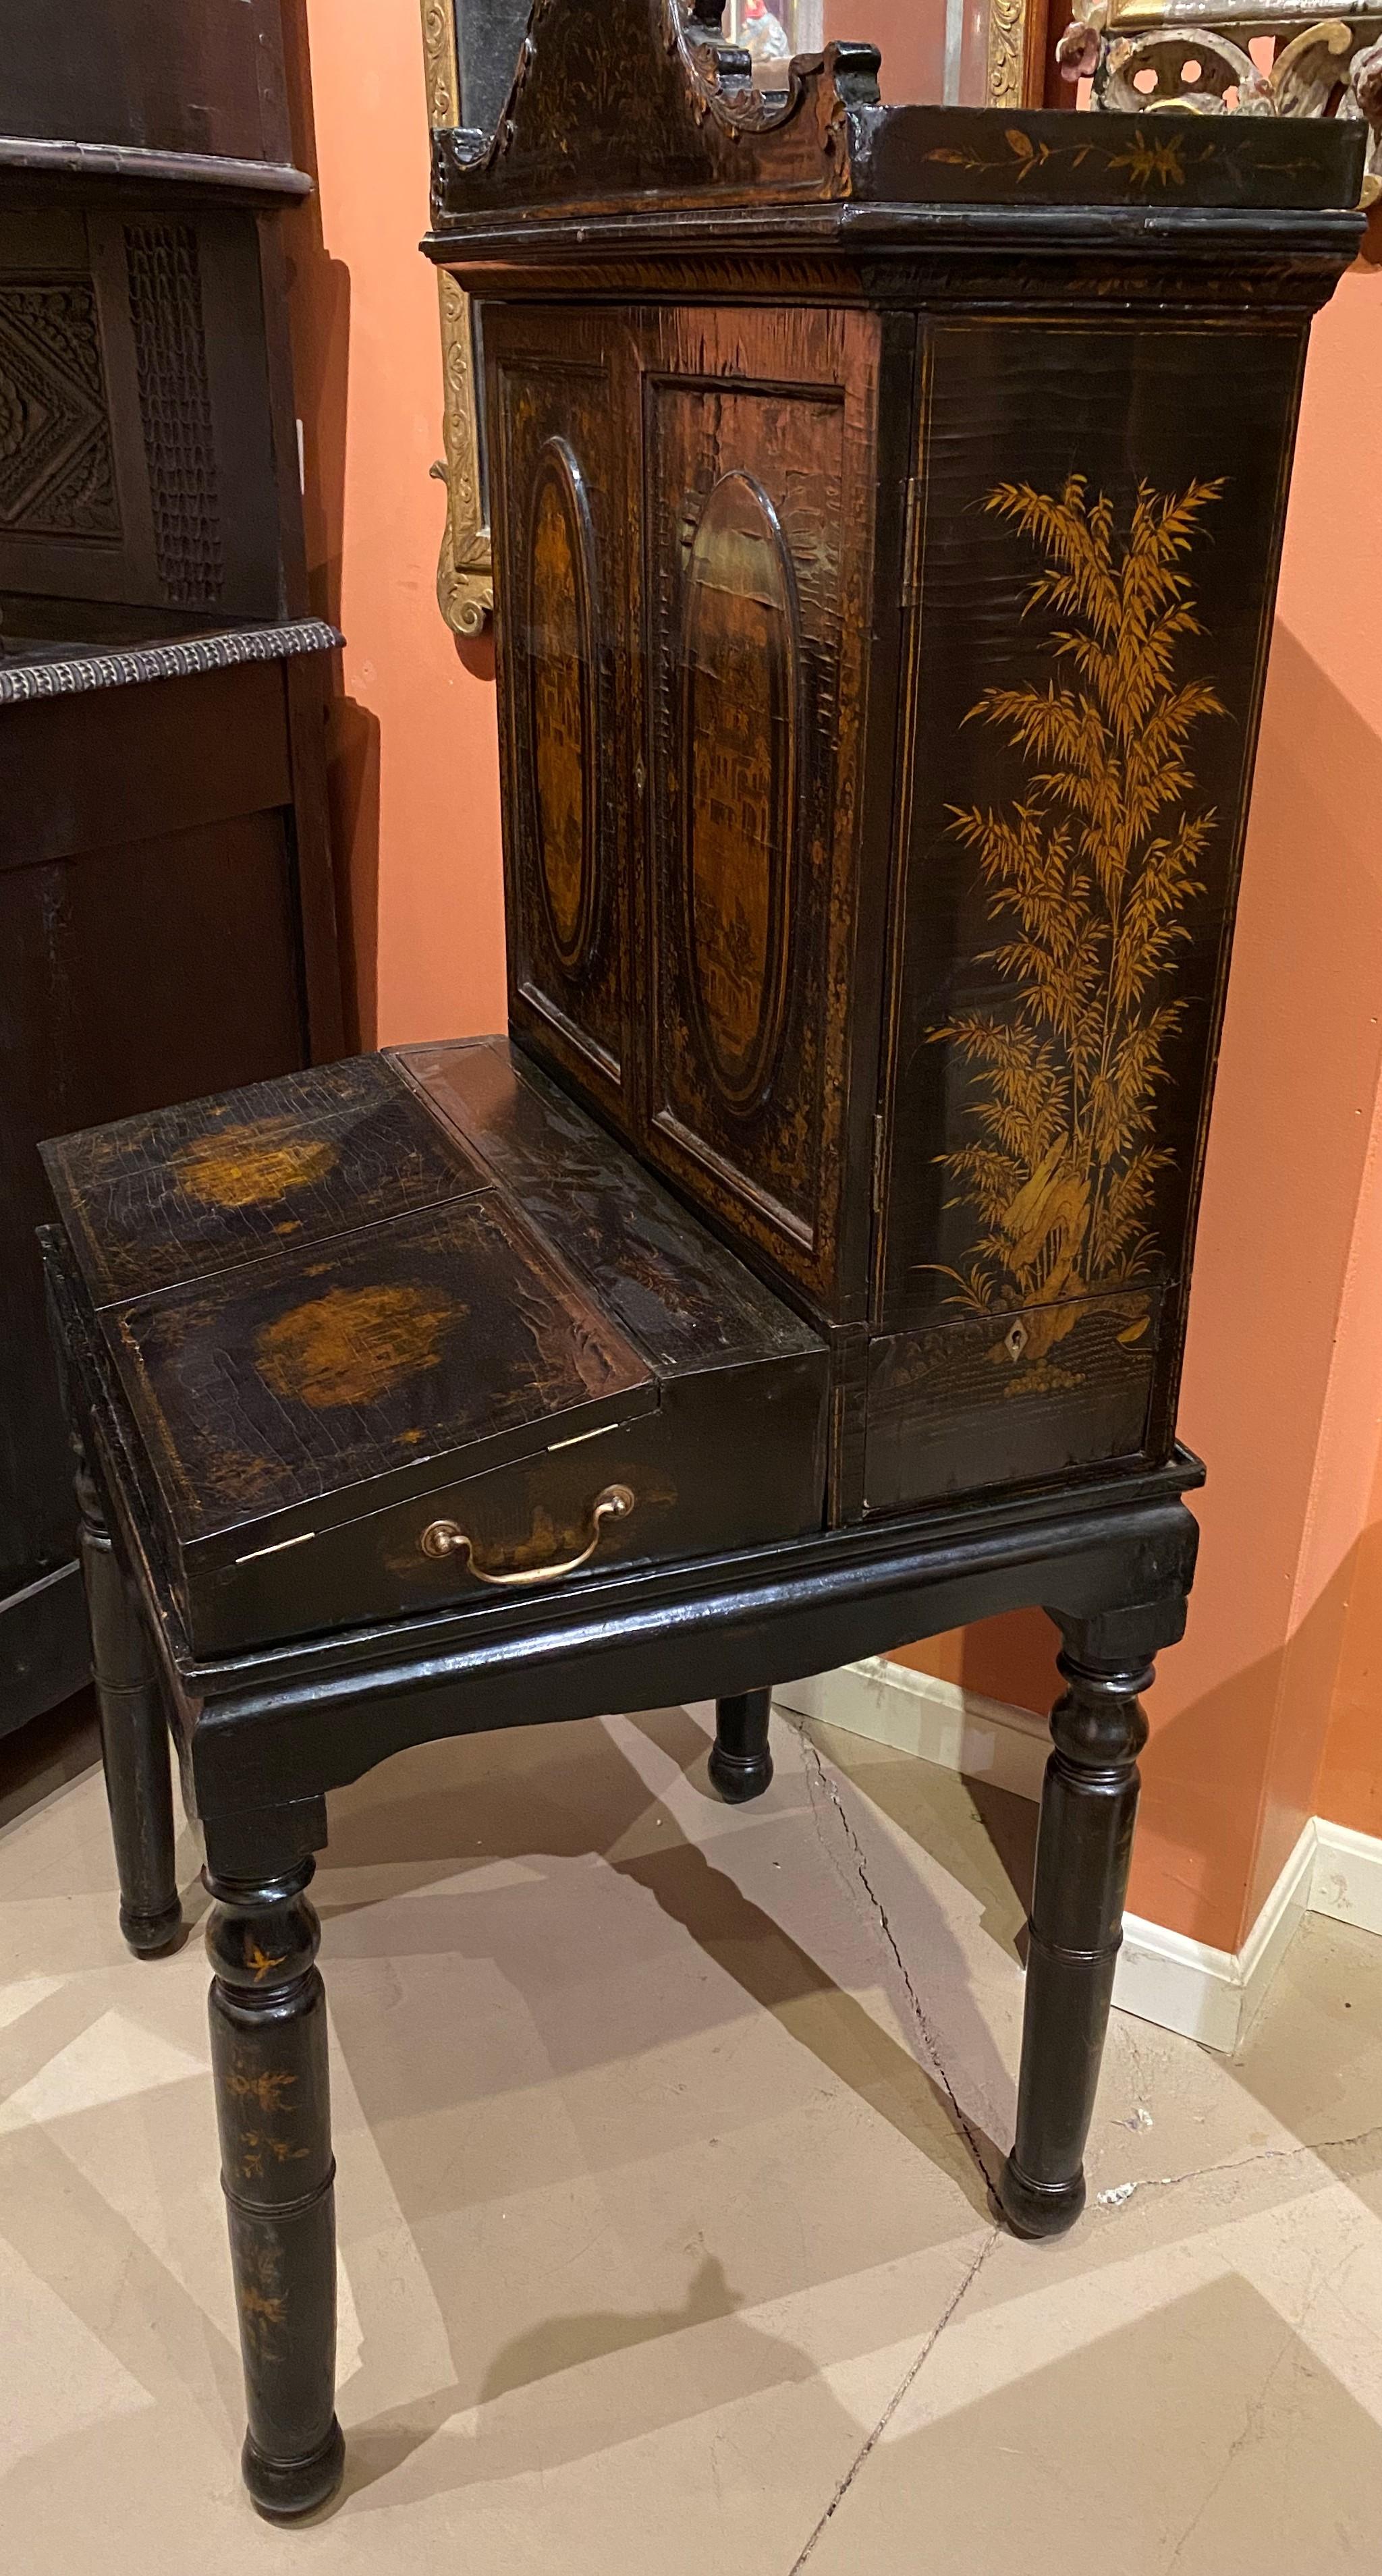 19th Century 3-Piece Diminutive Lacquer Secretary Desk with Nice Chinoiserie In Good Condition For Sale In Milford, NH